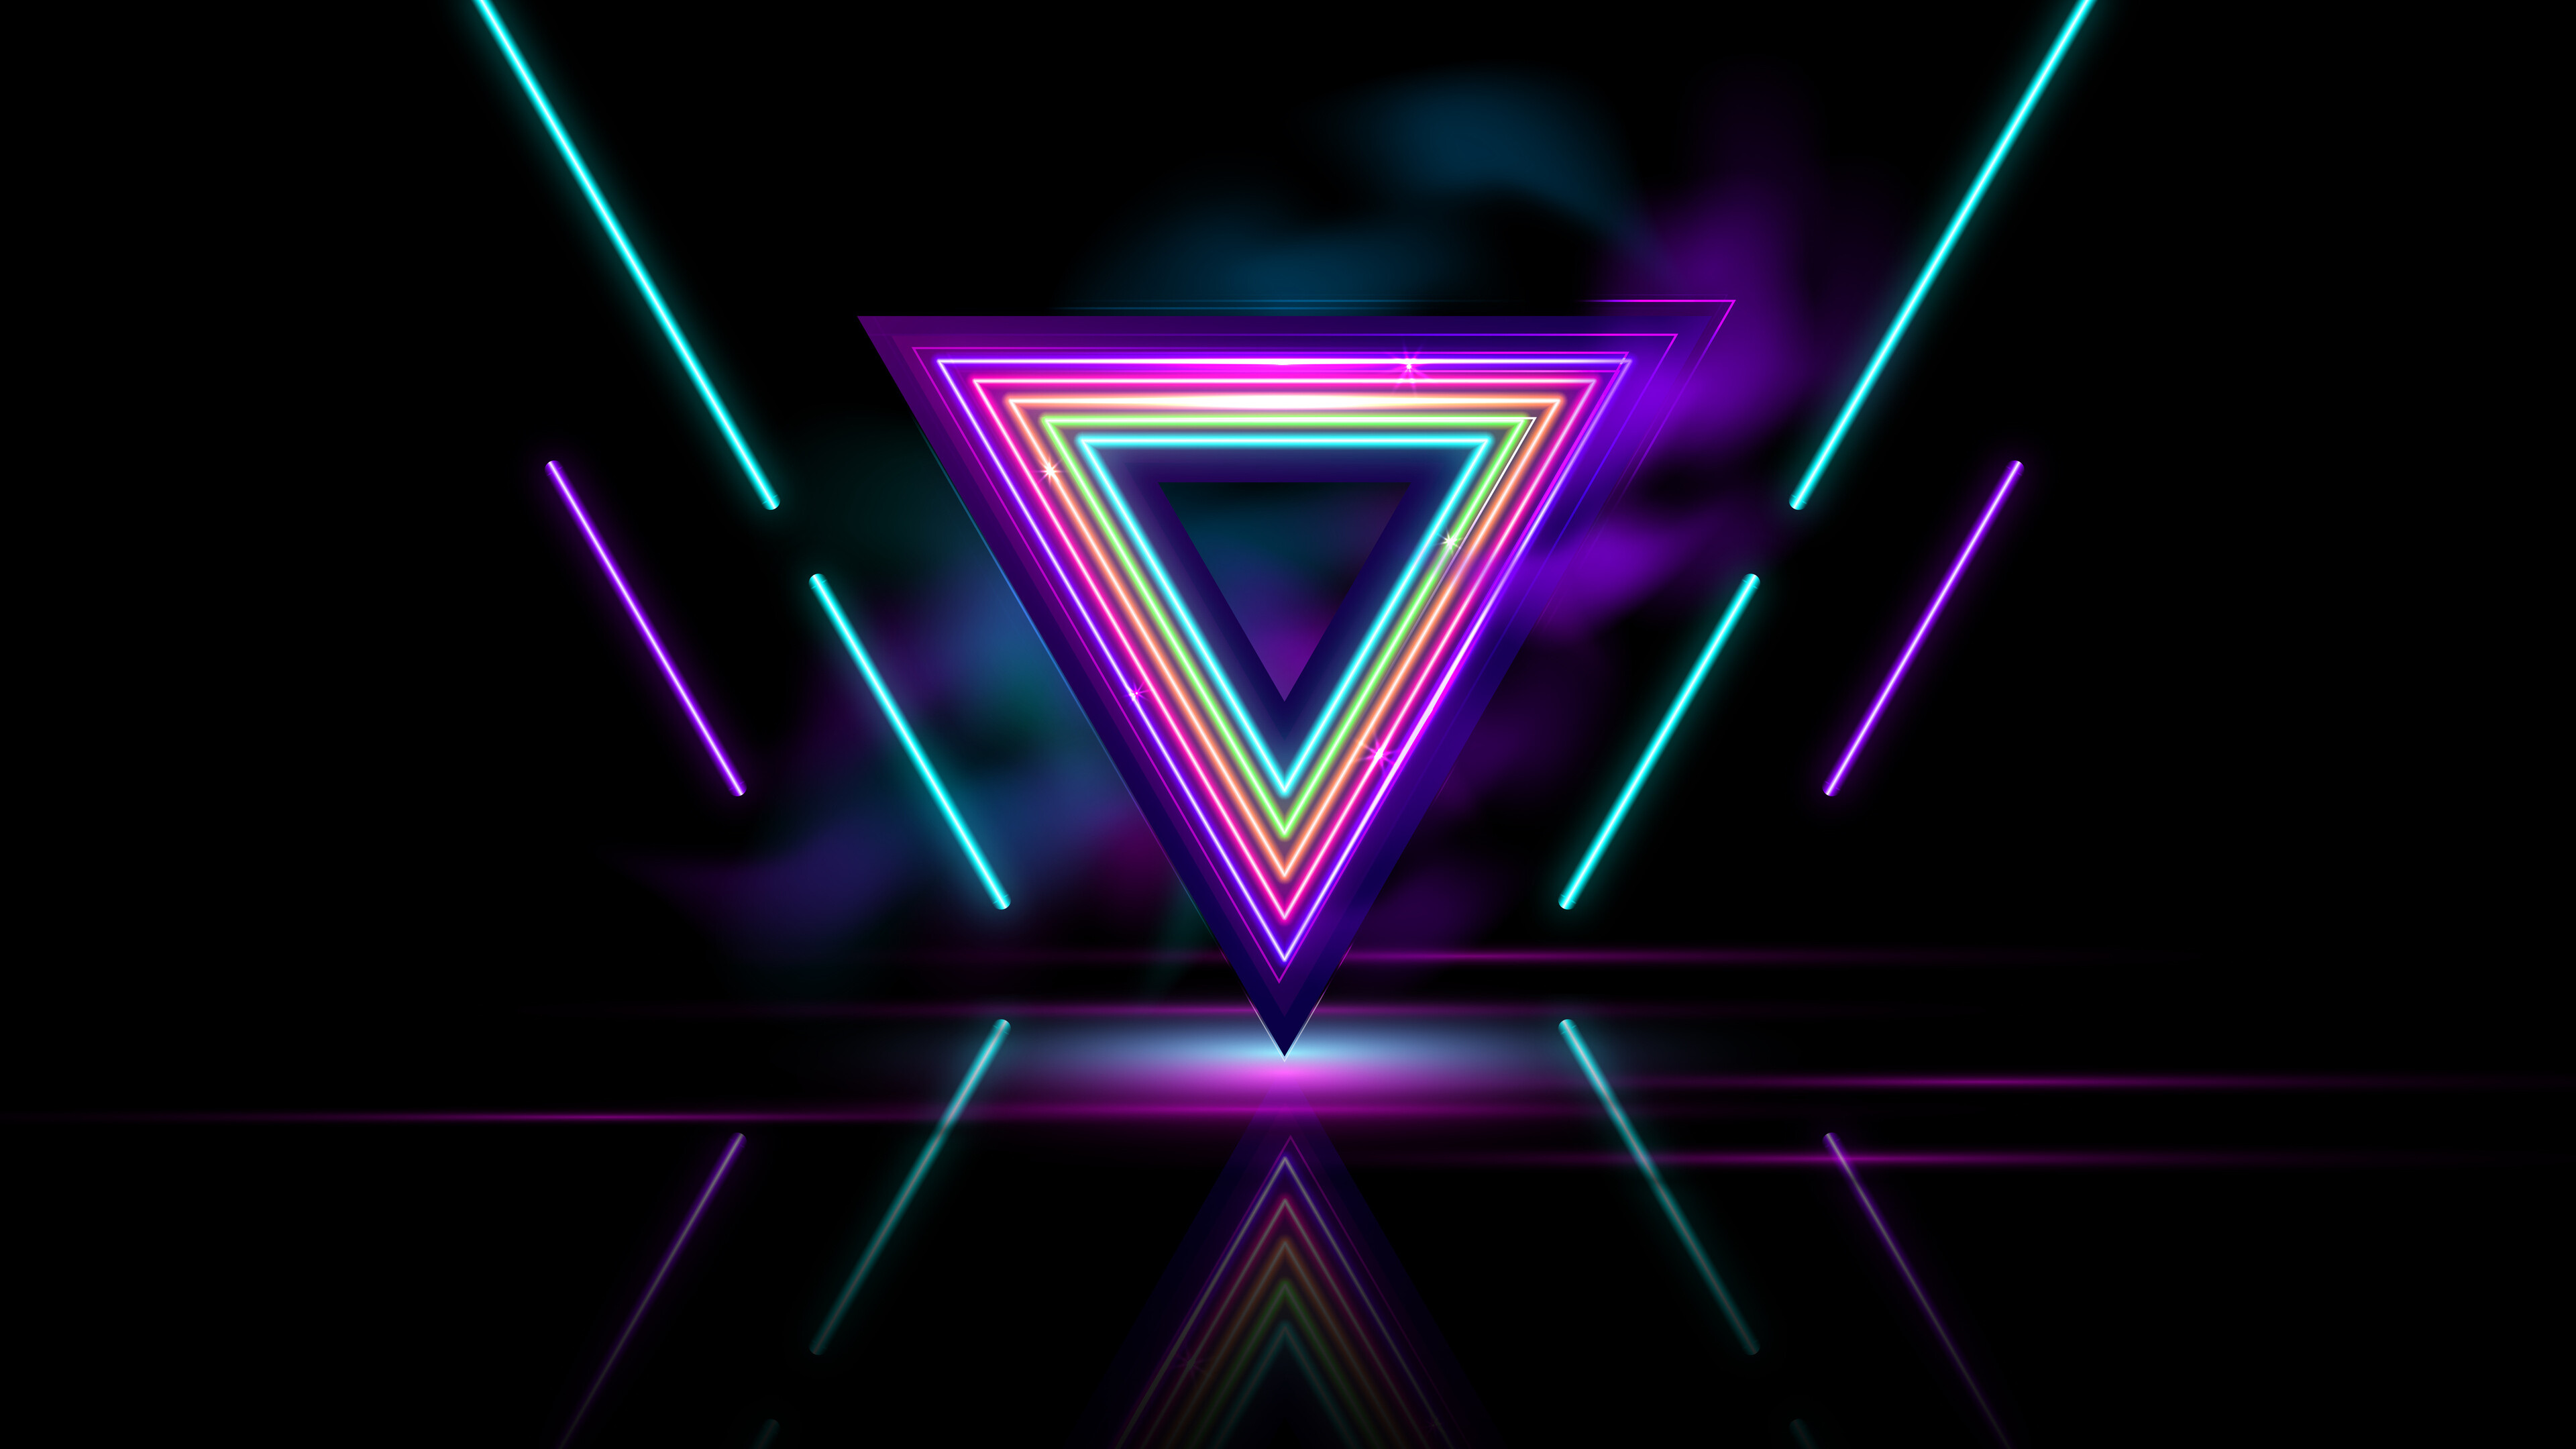 Triangle: Abstract equilateral figure, Neon lights, Rays. 3840x2160 4K Wallpaper.